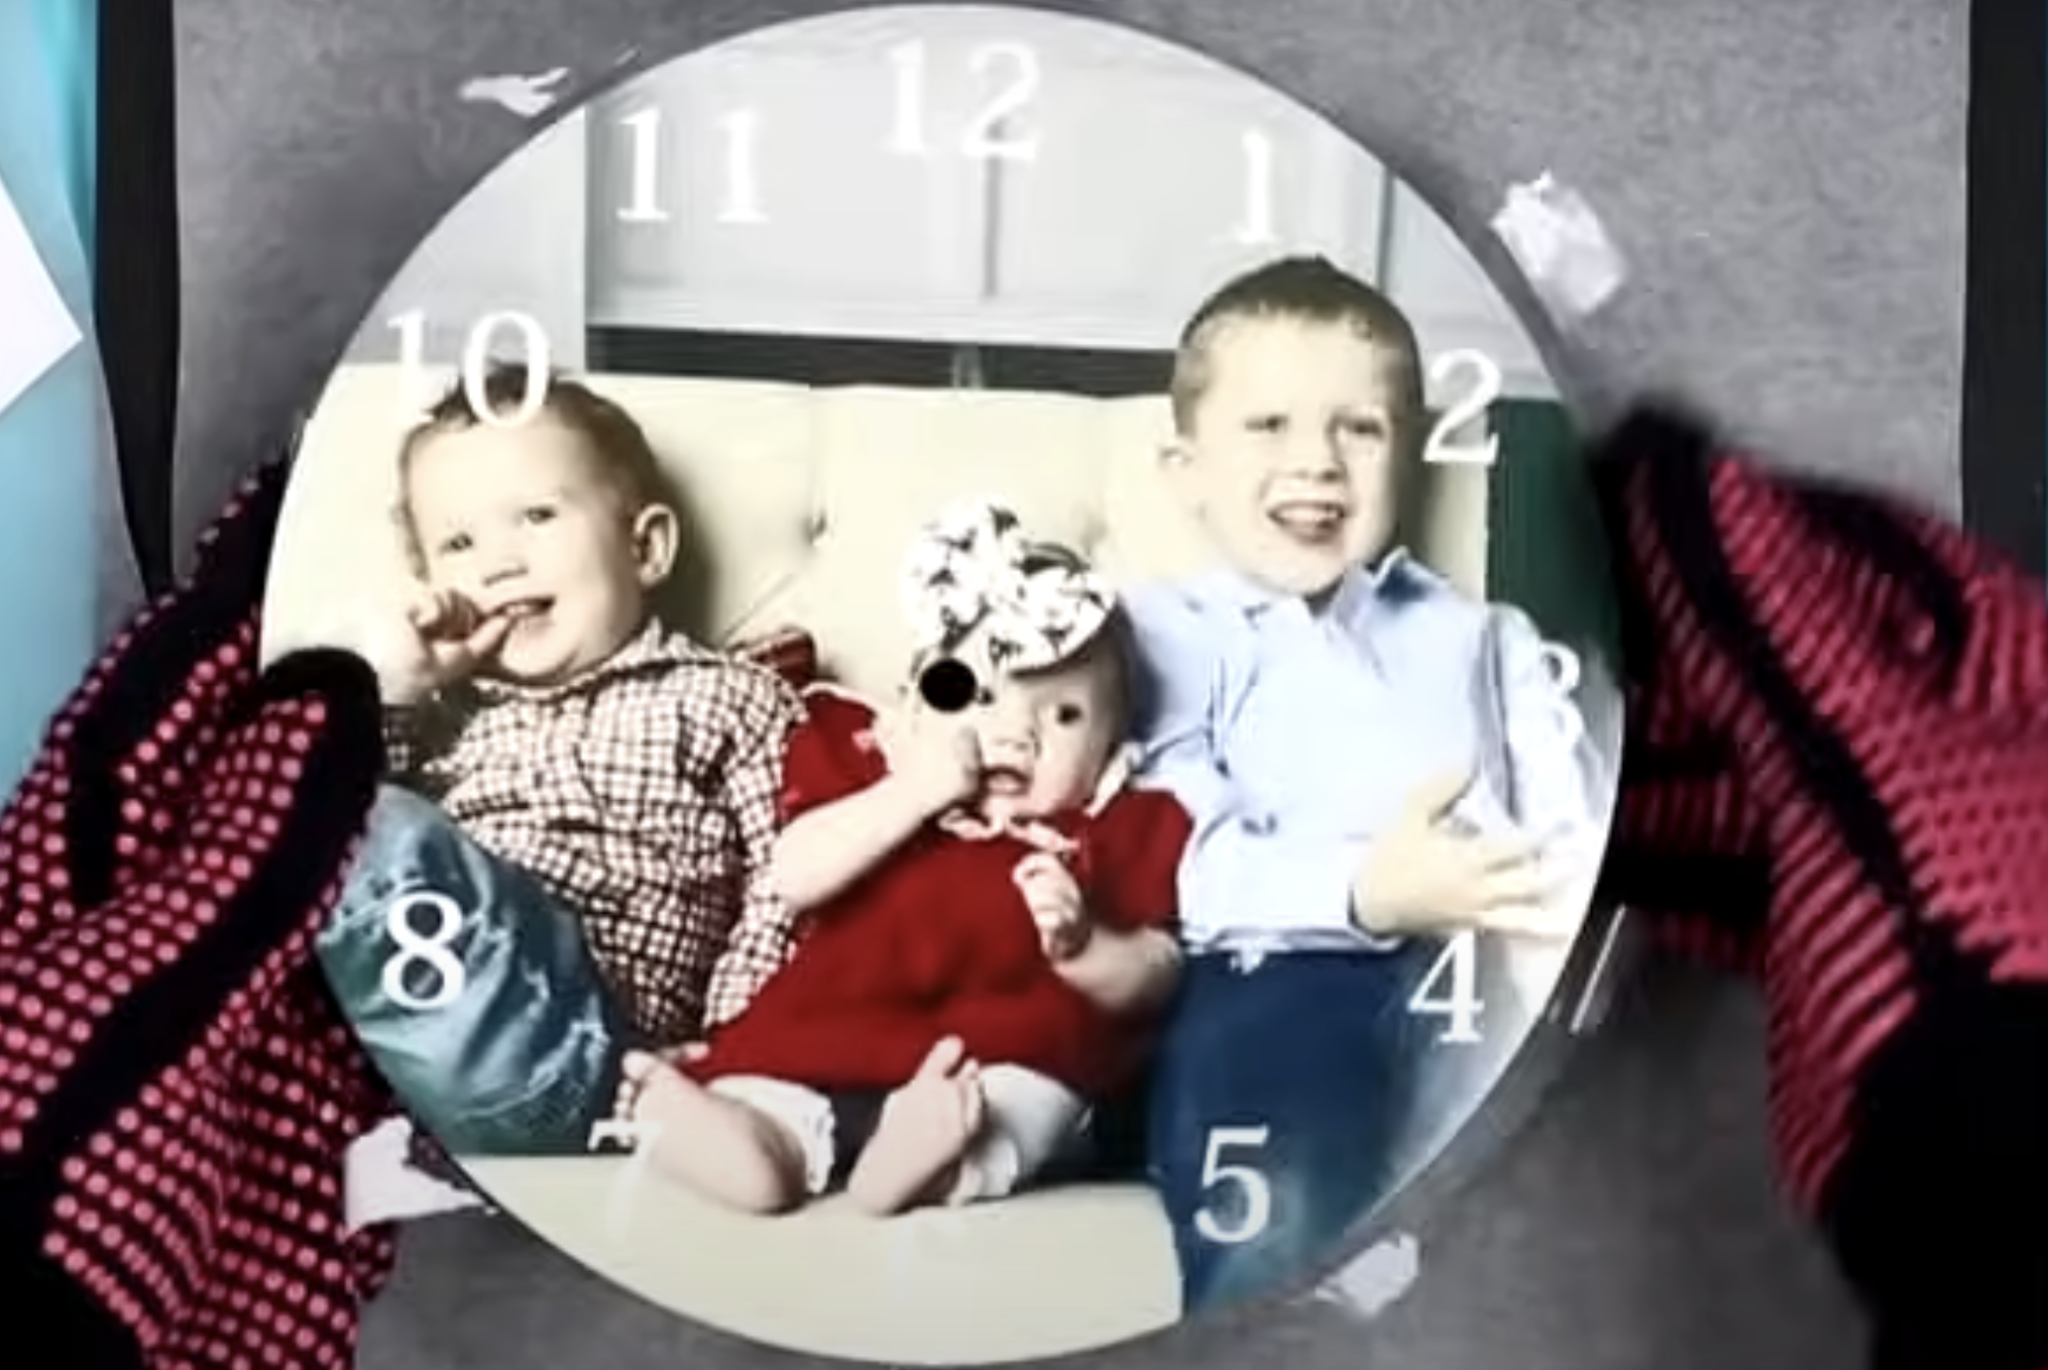 Remove sublimation print to reveal photo on clock.